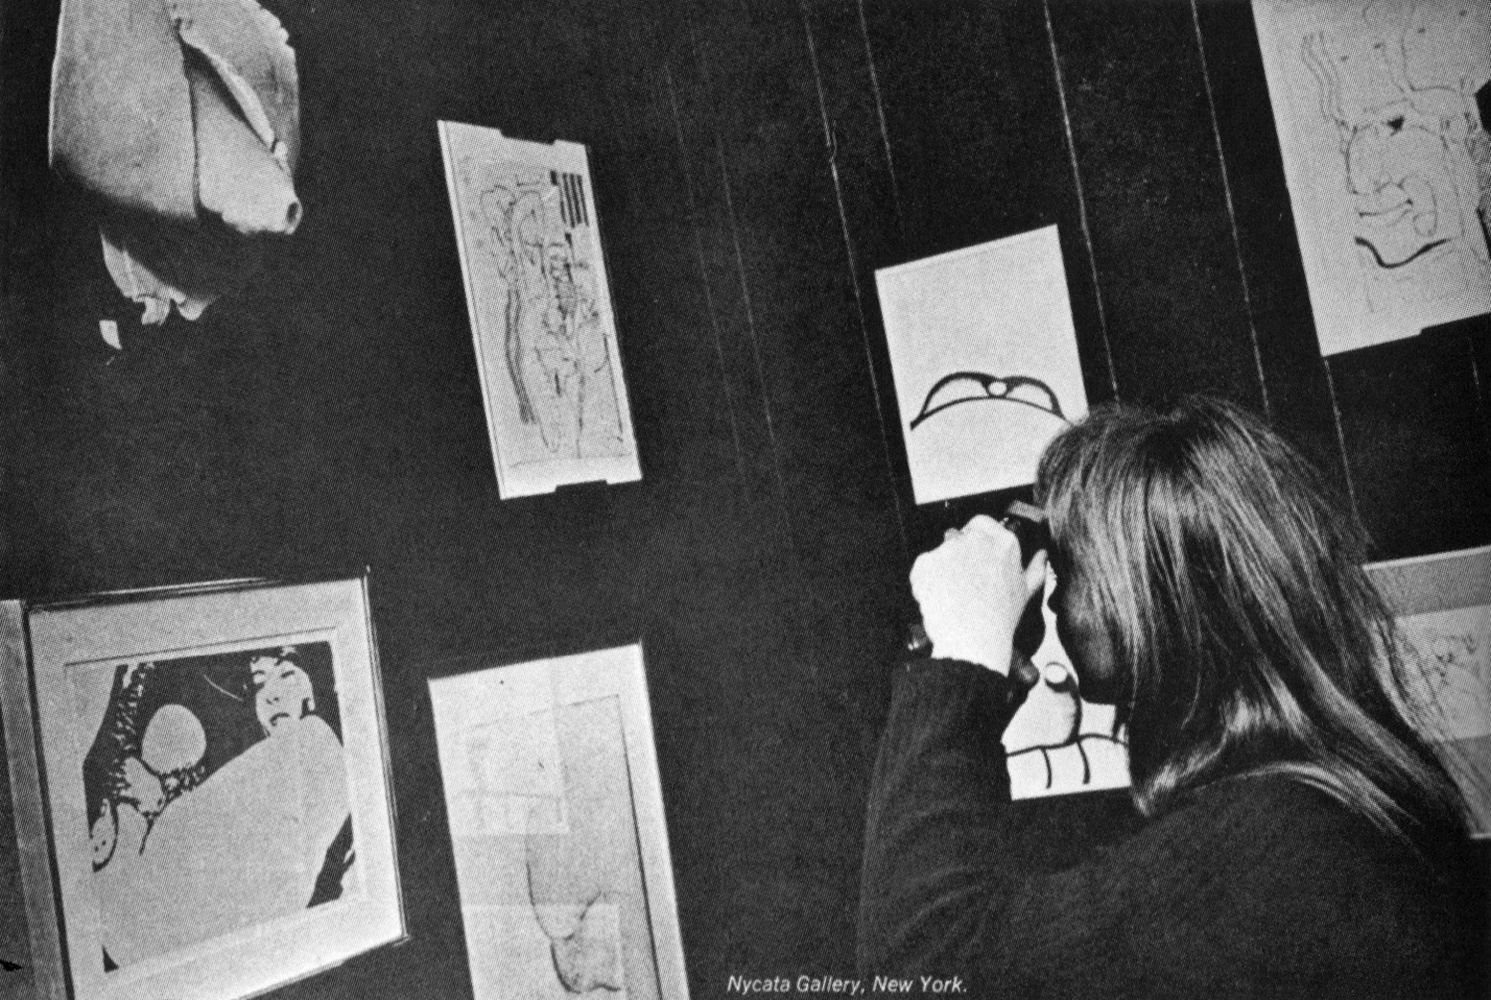 [FIG. 7], Hannah Wilke photographing her sculpture Untitled, 1966, in Hetero Is at NYCATA Gallery, New York, 1966&ndash;67